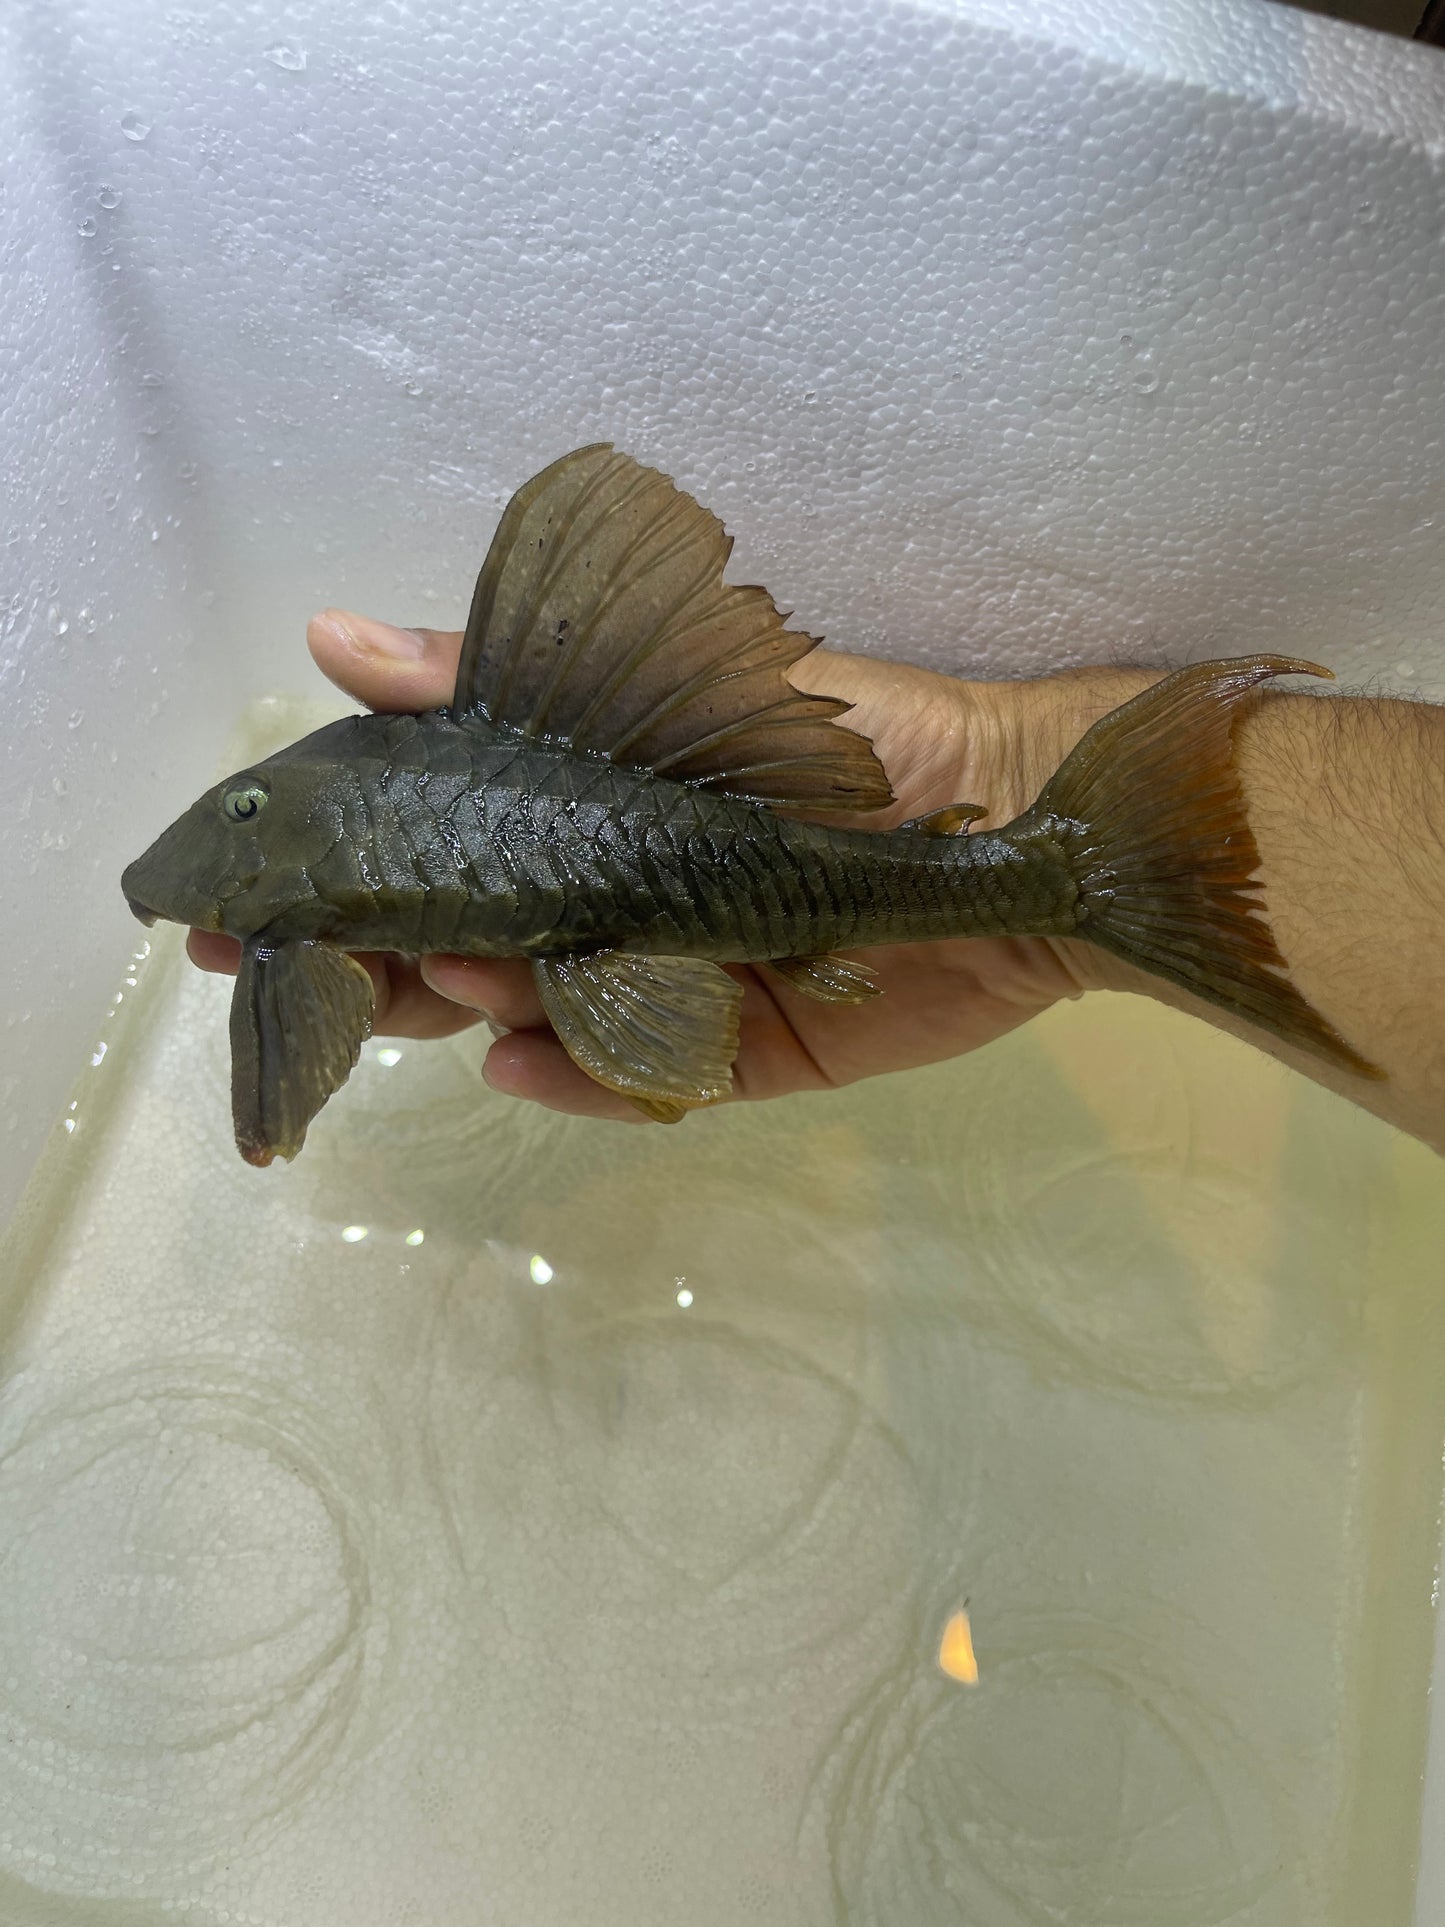 L137 Blue Eyed Red Fin Pleco (Hypostomus soniae)